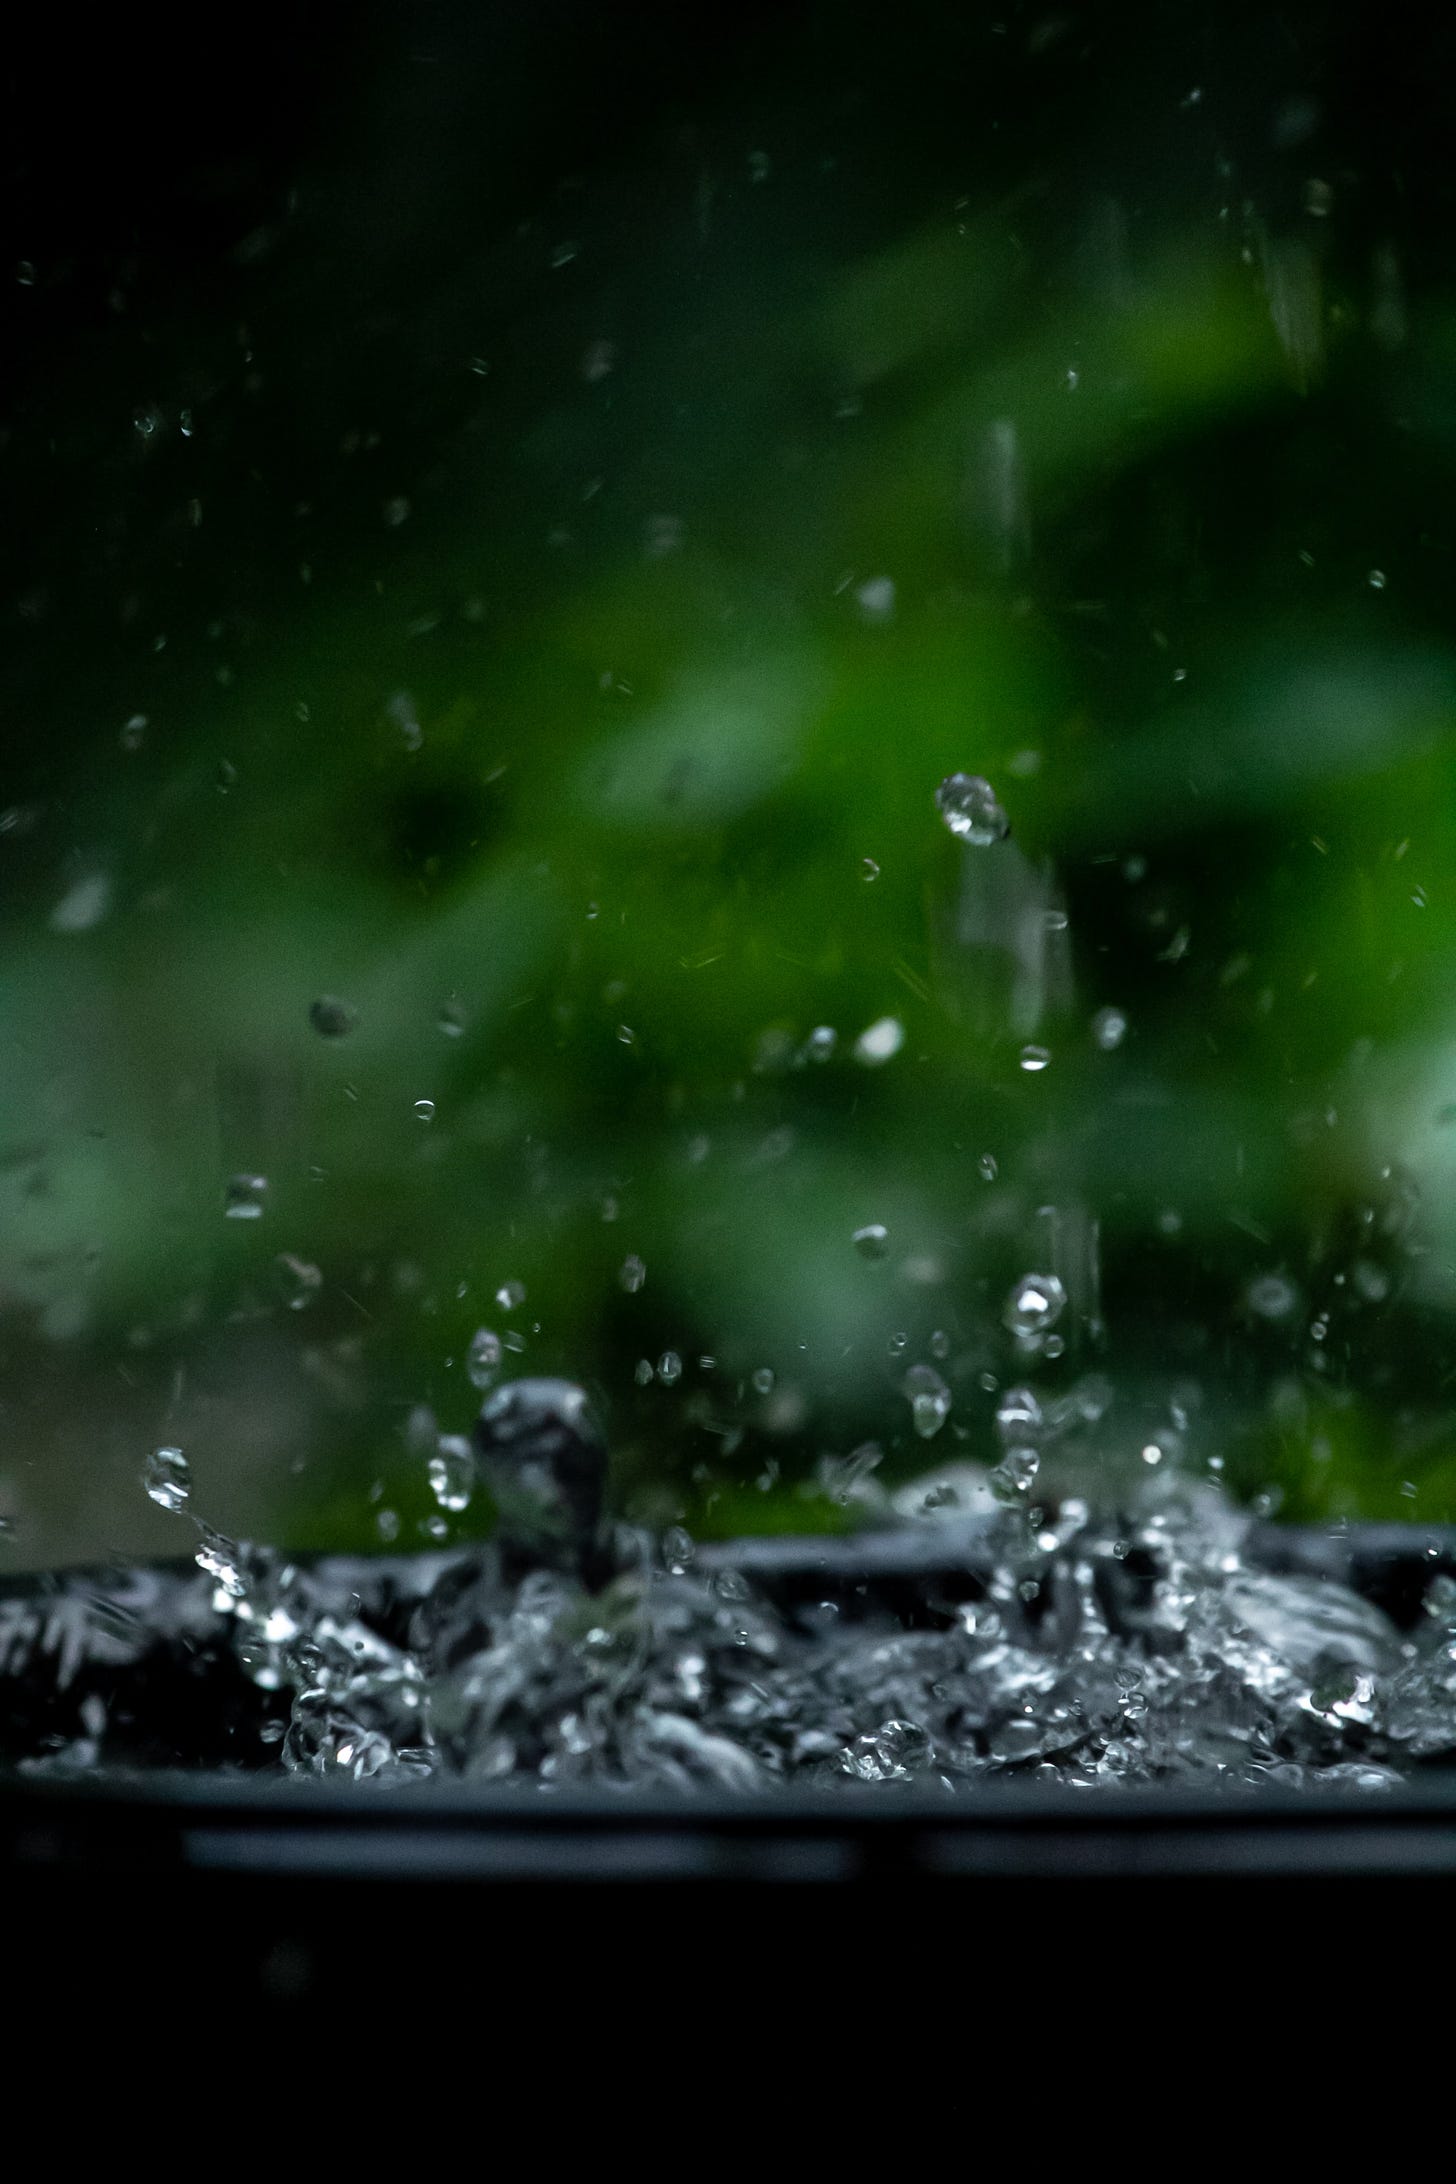 A moody dark green background. The foreground has a container of water, and drops are falling into it.